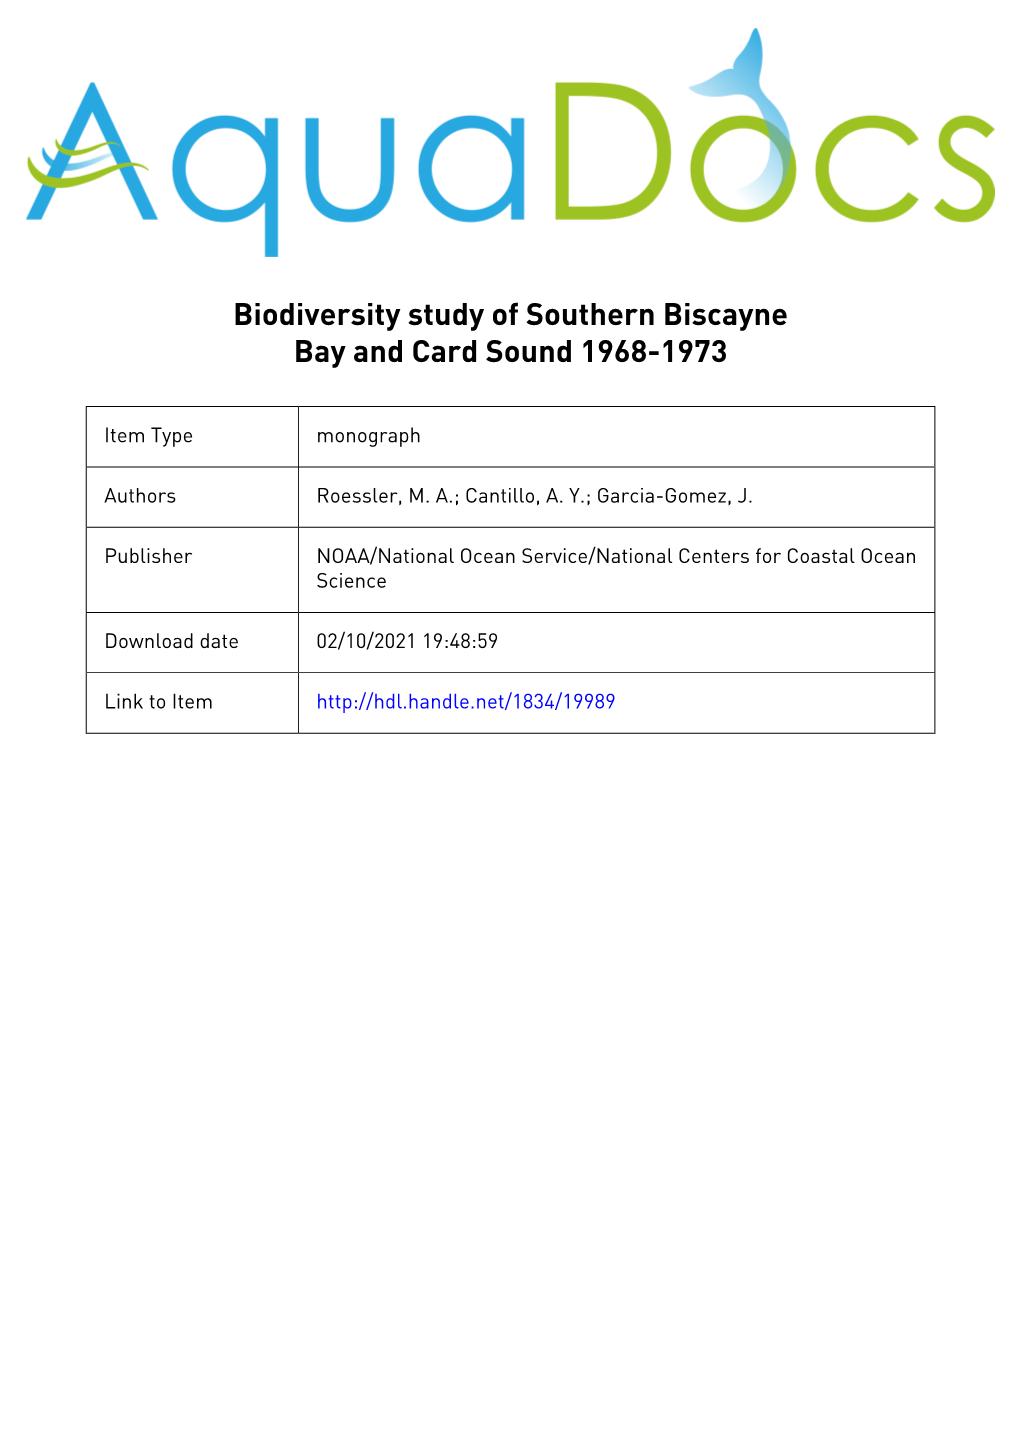 Biodiversity Study of Southern Biscayne Bay and Card Sound 1968-1973